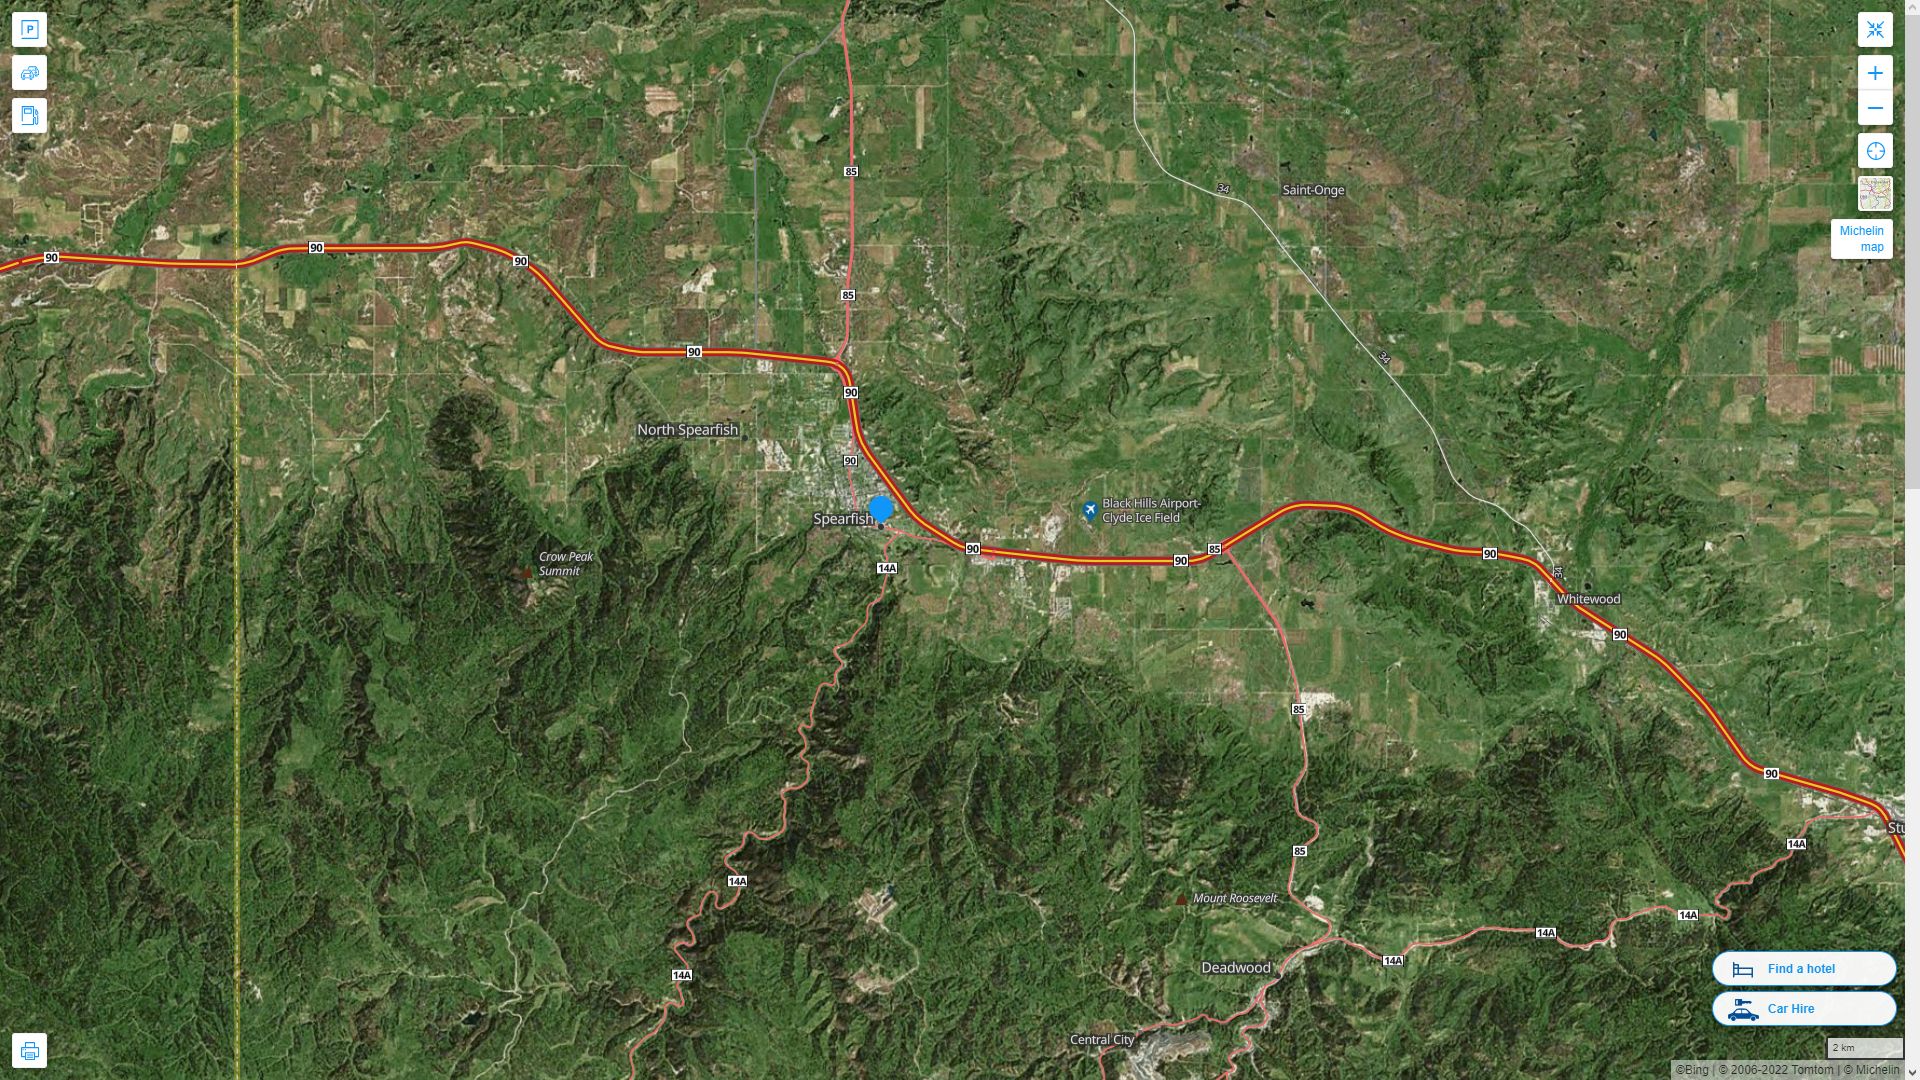 Spearfish South Dakota Highway and Road Map with Satellite View